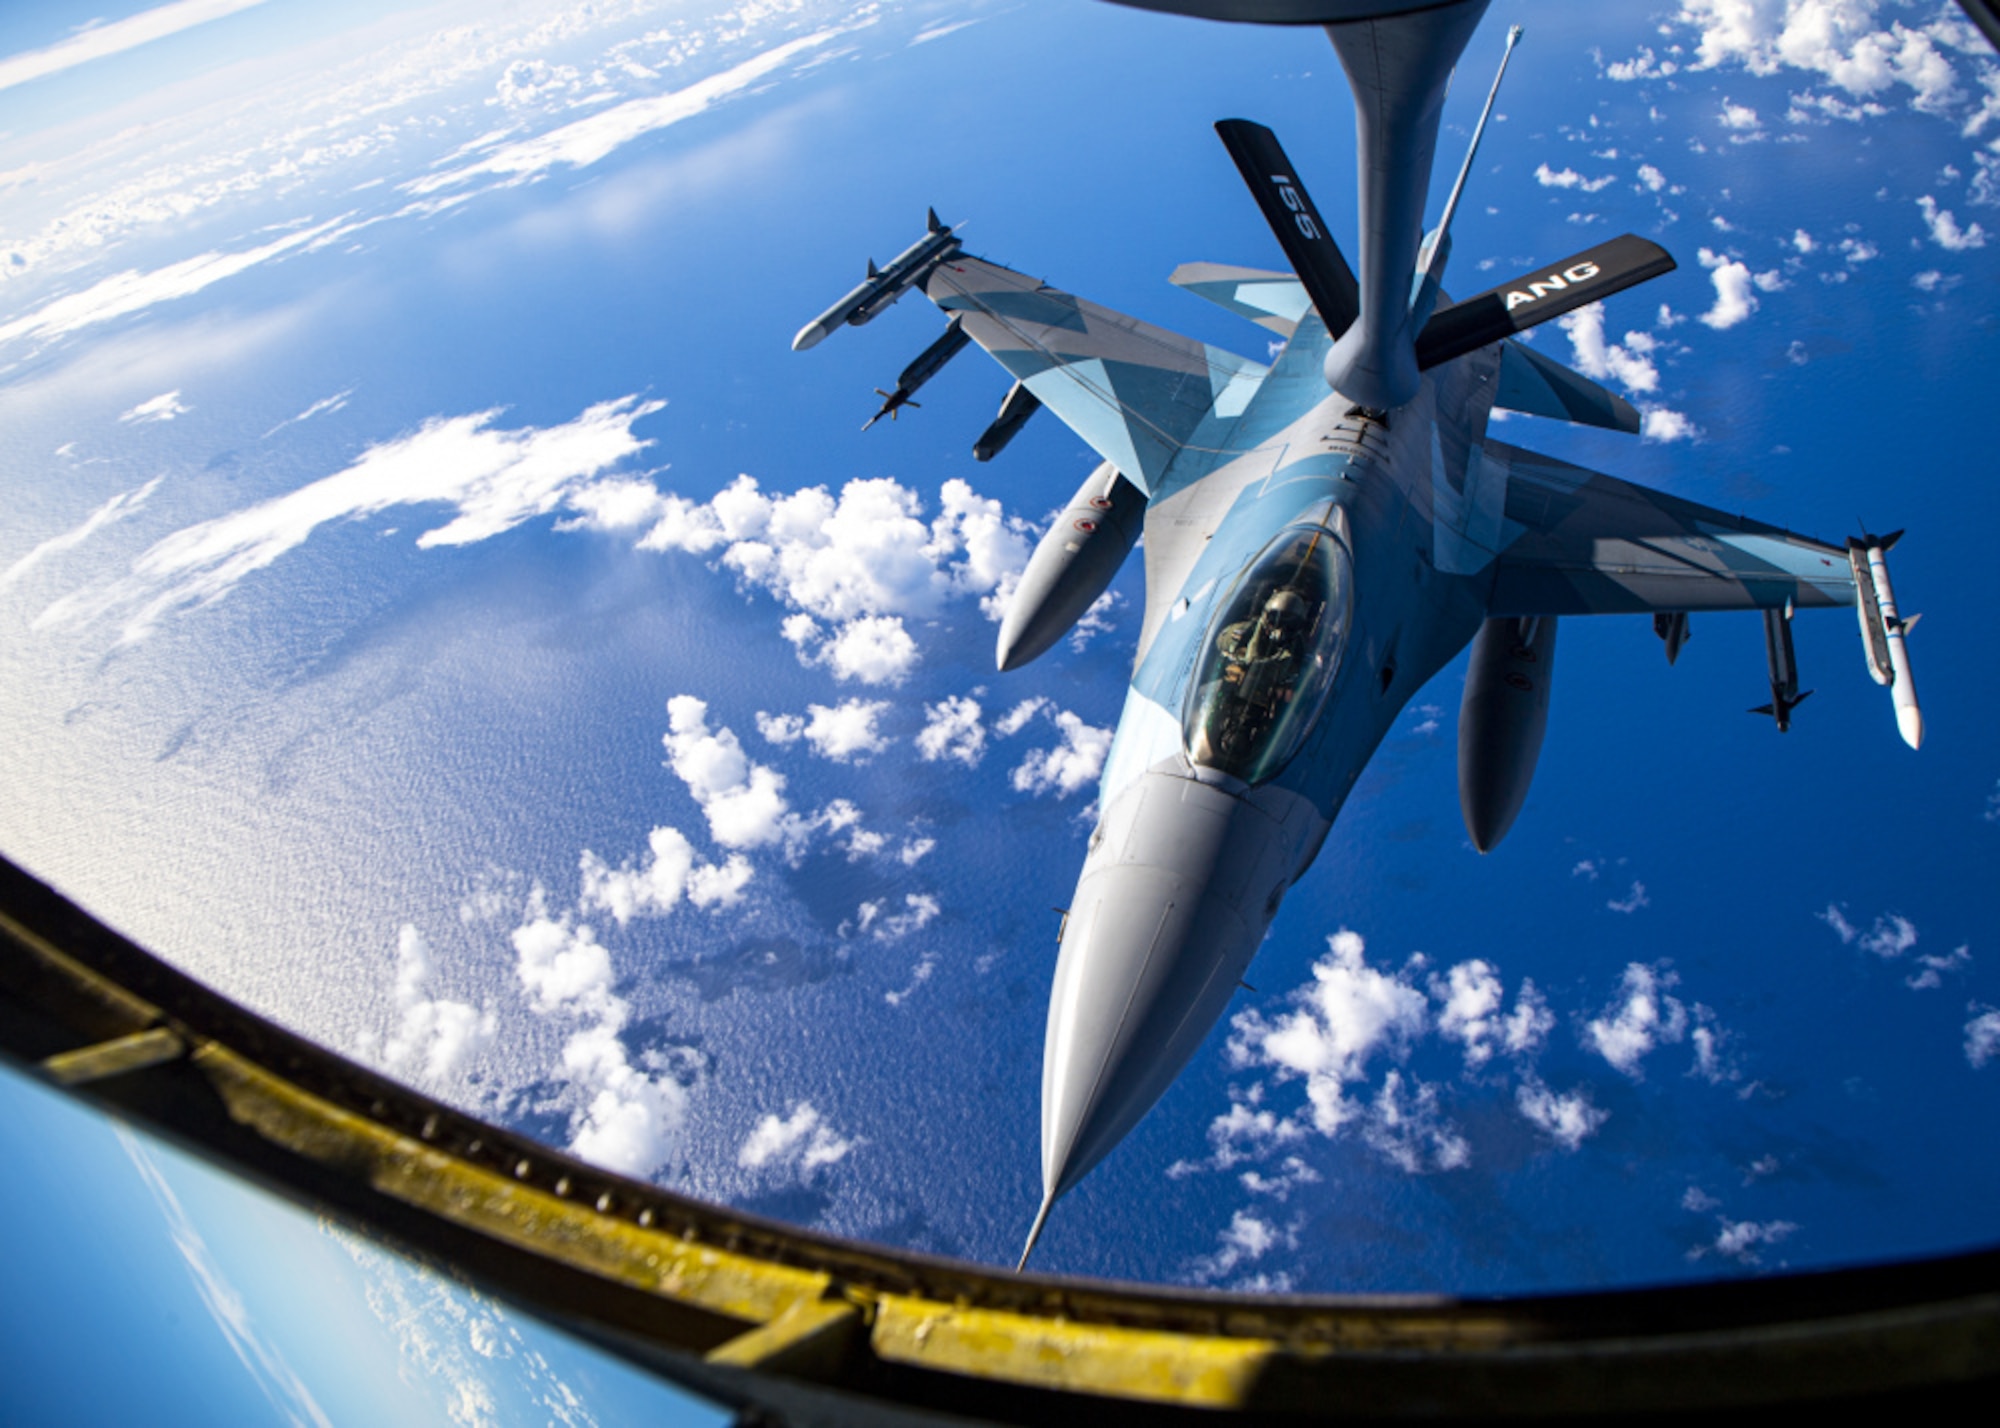 A U.S. Air Force F-16 Fighting Falcon assigned to the 18th Aggressor Squadron conducts an aerial refueling with a U.S. Air Force KC-135 Stratotanker during exercise Cope North 21 near Andersen Air Force Base, Guam, Feb. 18, 2021. (U.S. Air Force photo by Senior Airman Duncan C. Bevan)